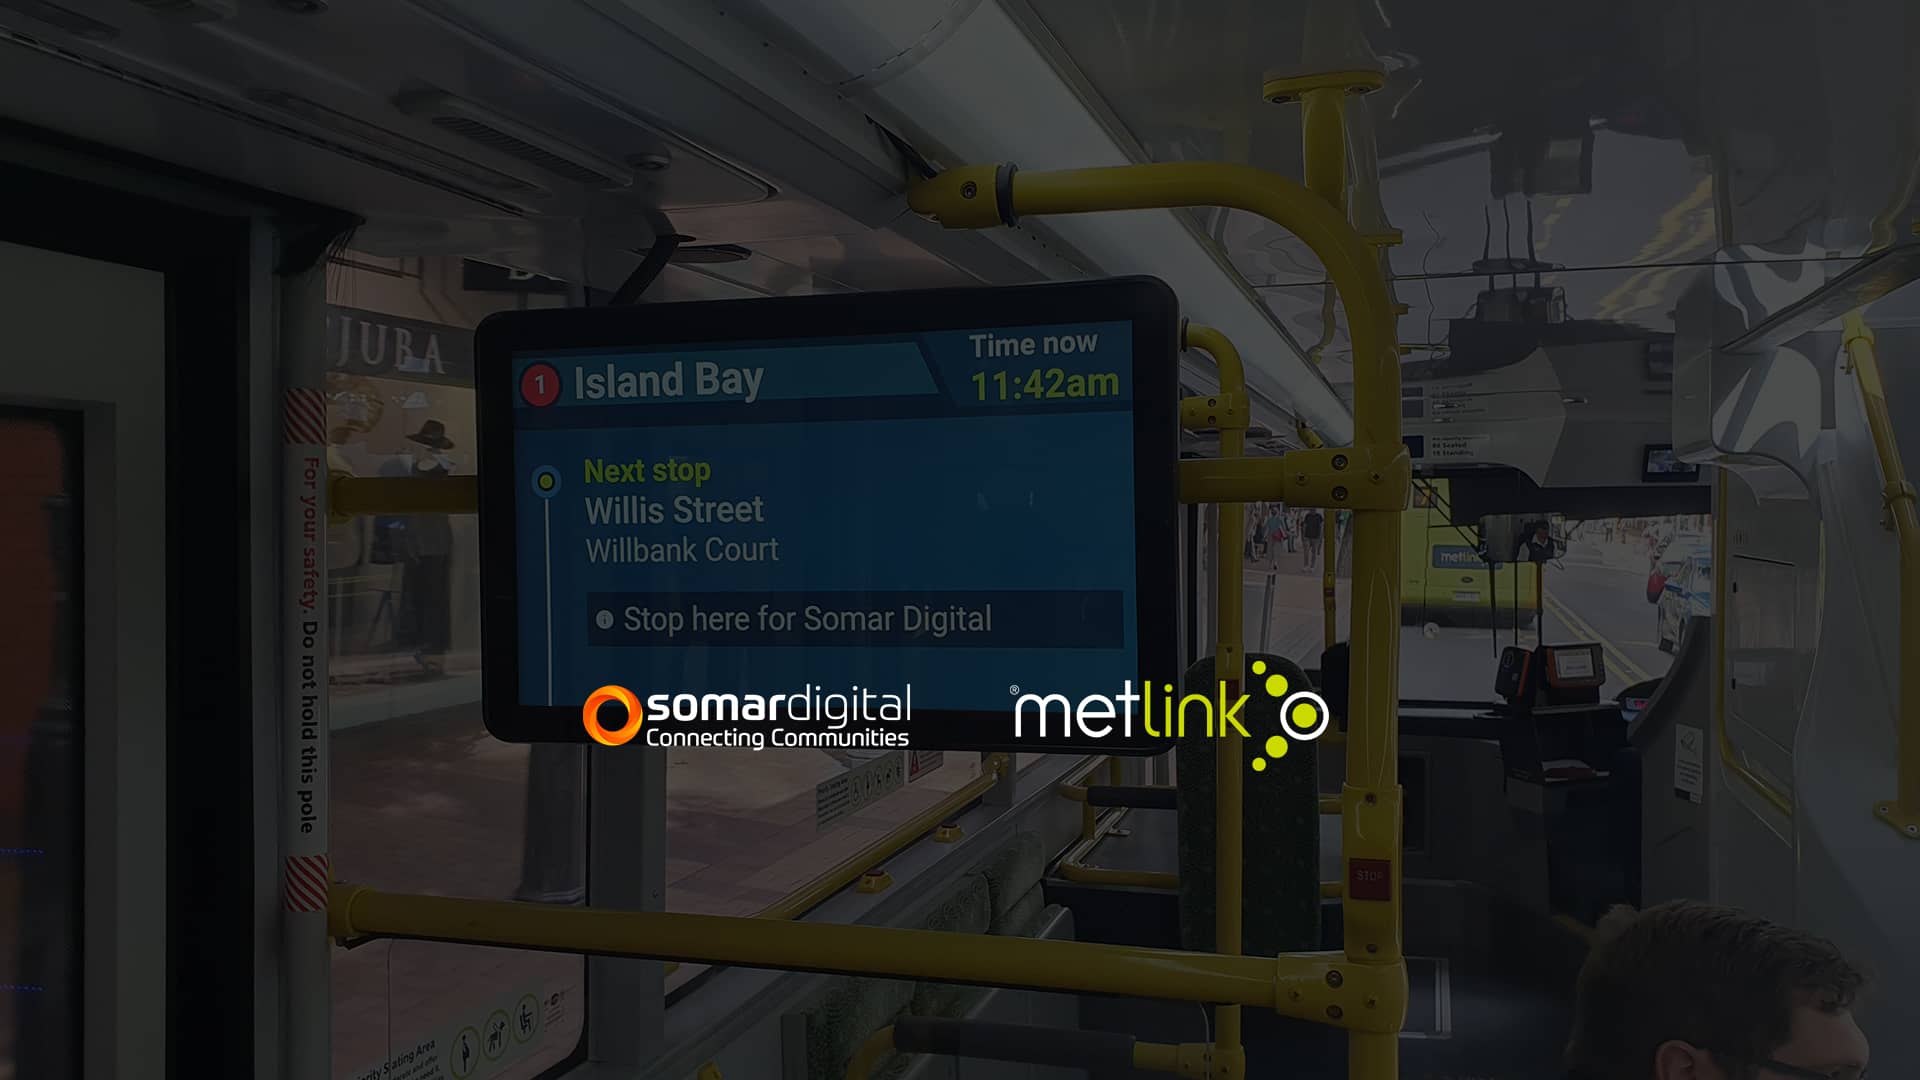 Next Stop Announcement Technology Is Going Live on Wellington Buses